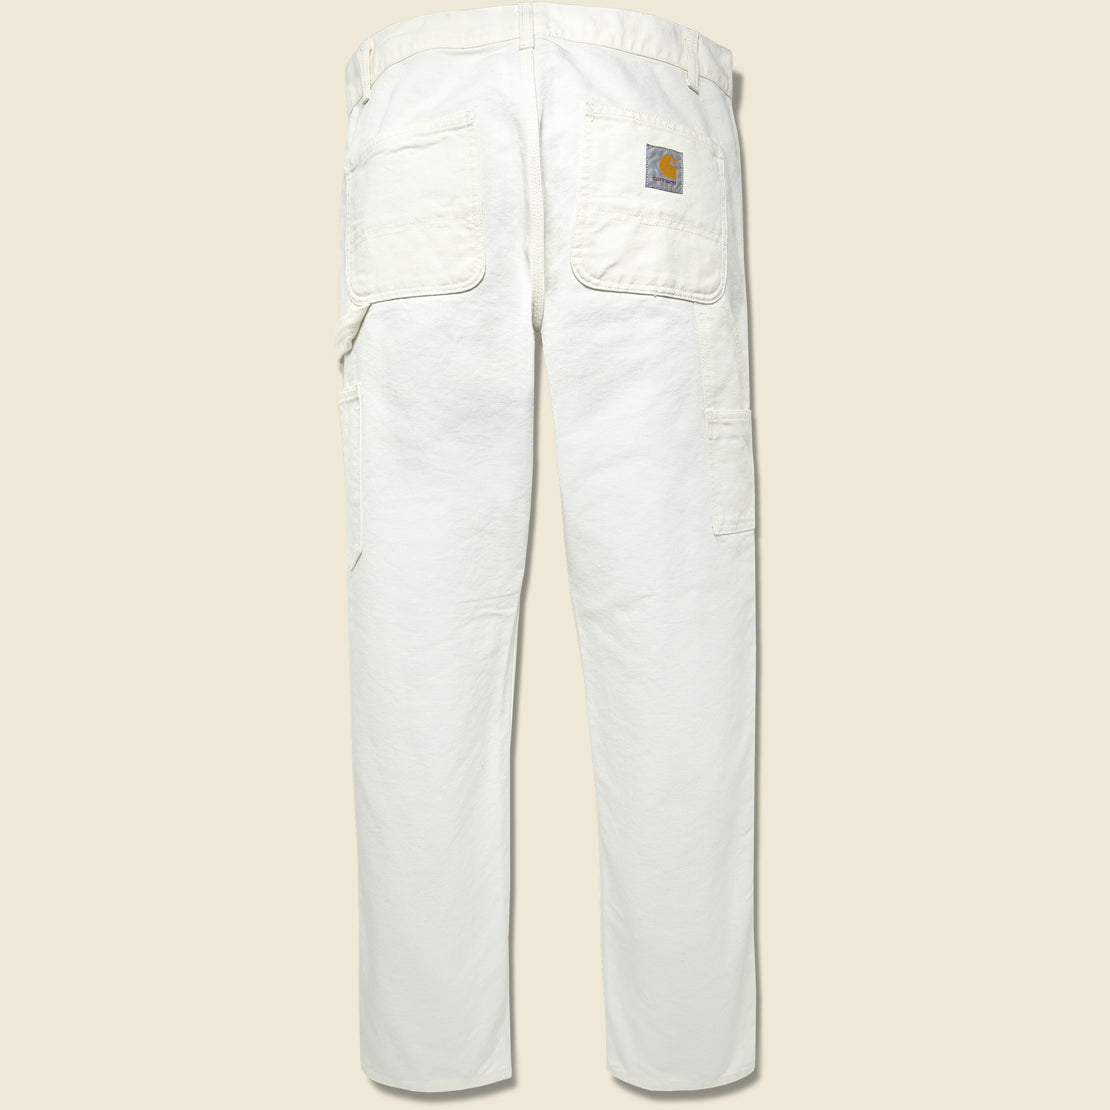 Ruck Double Knee Pant - Wax - Carhartt WIP - STAG Provisions - Pants - Twill